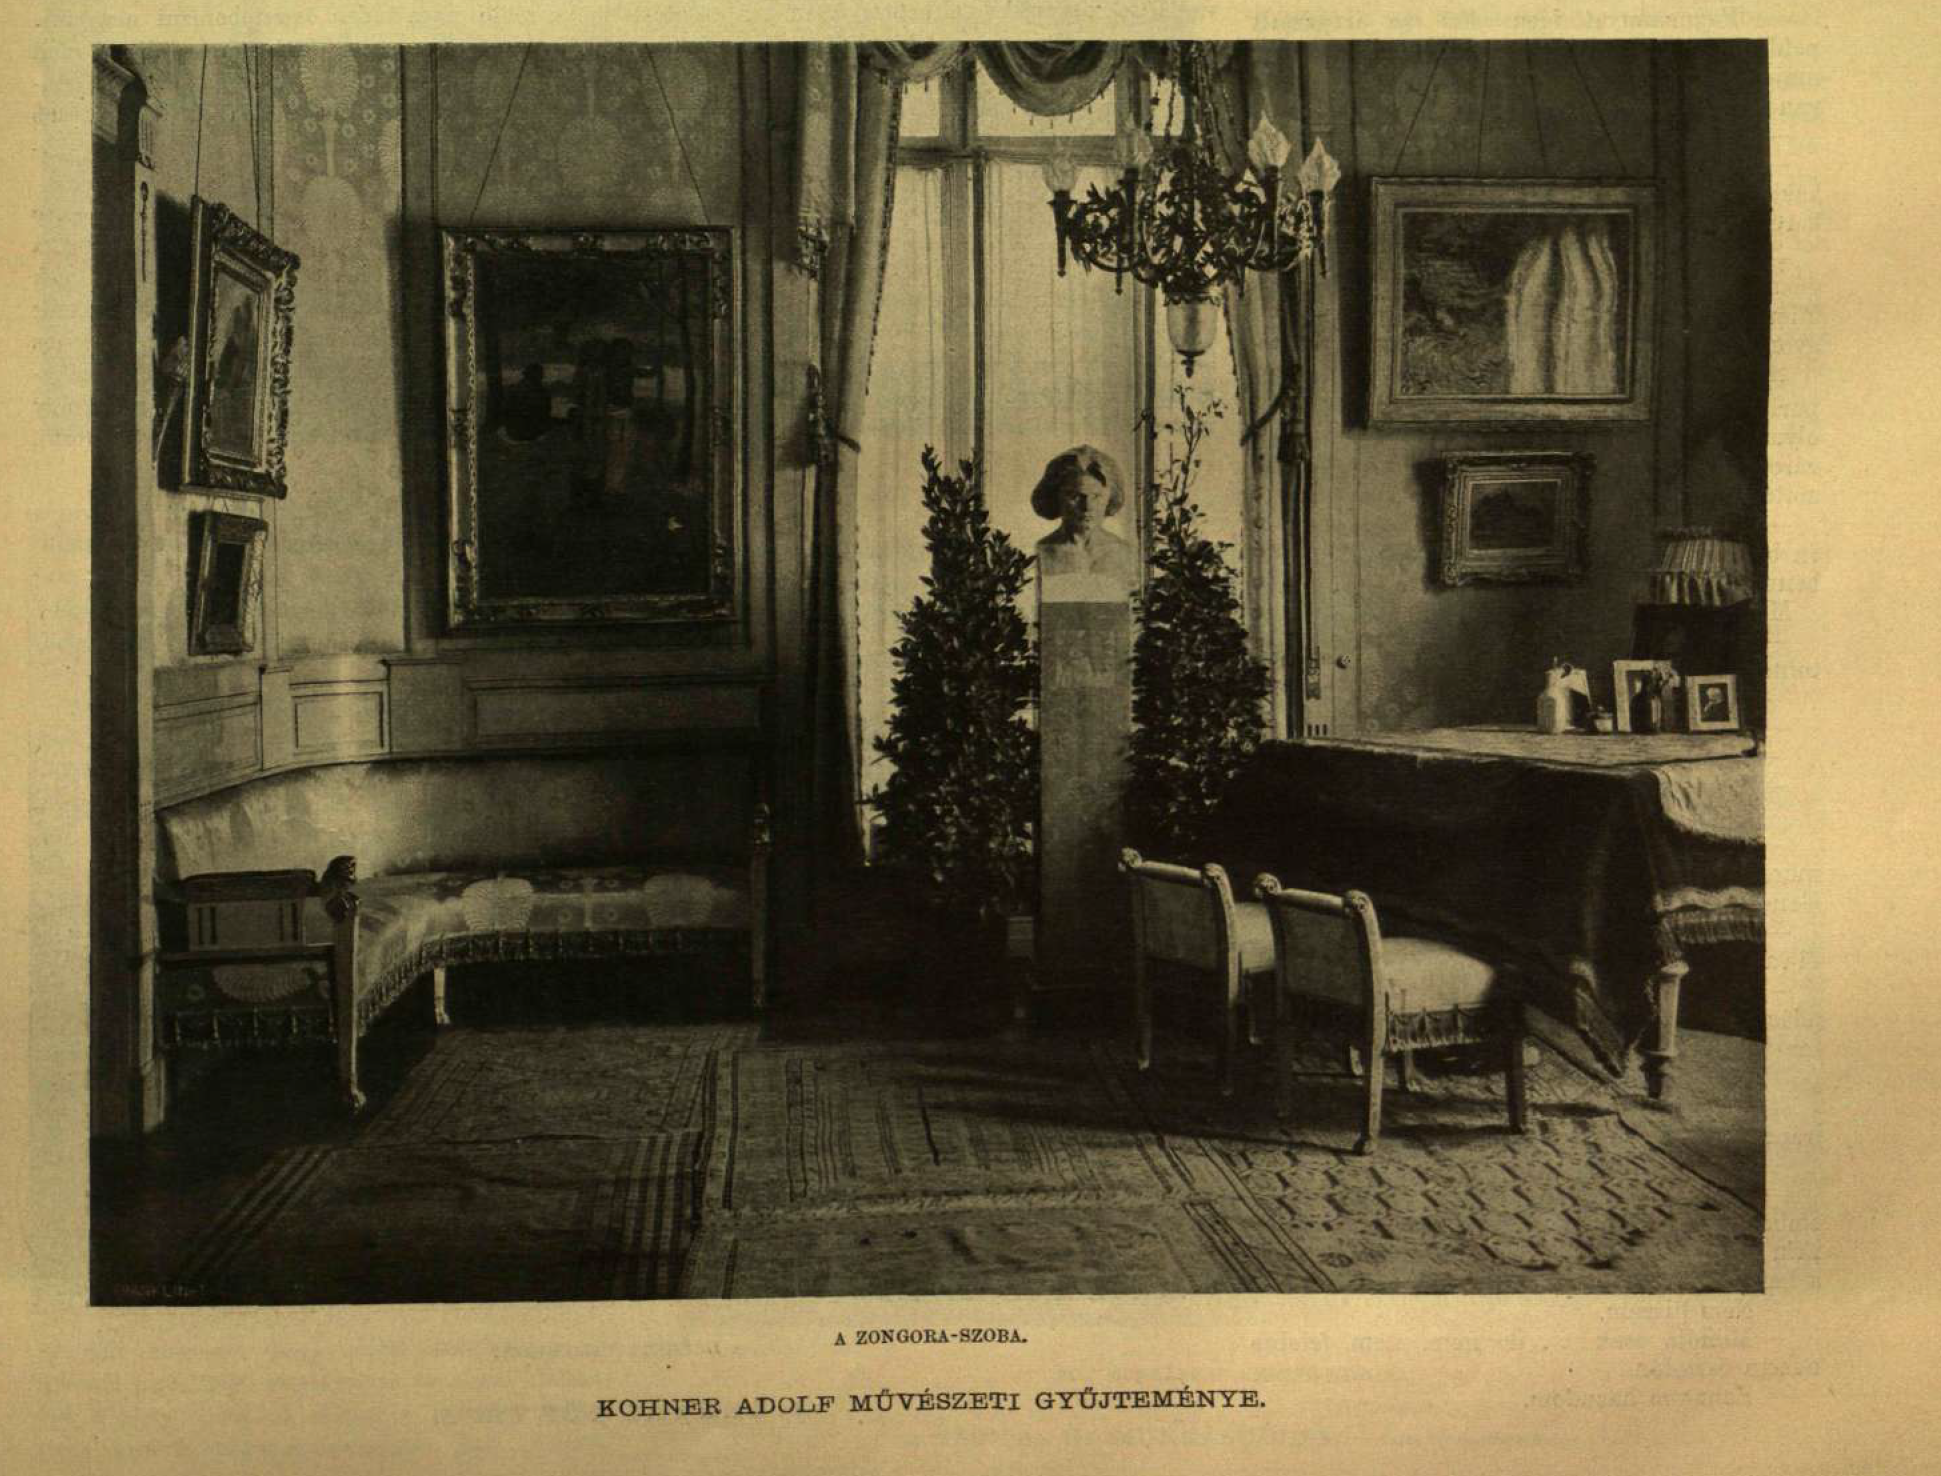 A black and white photograph depicting a room with a large window in the middle. On the right side of the window, there are two small chairs that are resting underneath a table with a cloth draped over it. Above the table are two paintings which hang on the wall. On the left side of the window, there is a curved couch or bench. Above it is three framed paintings. A chandelier hangs from the ceiling.